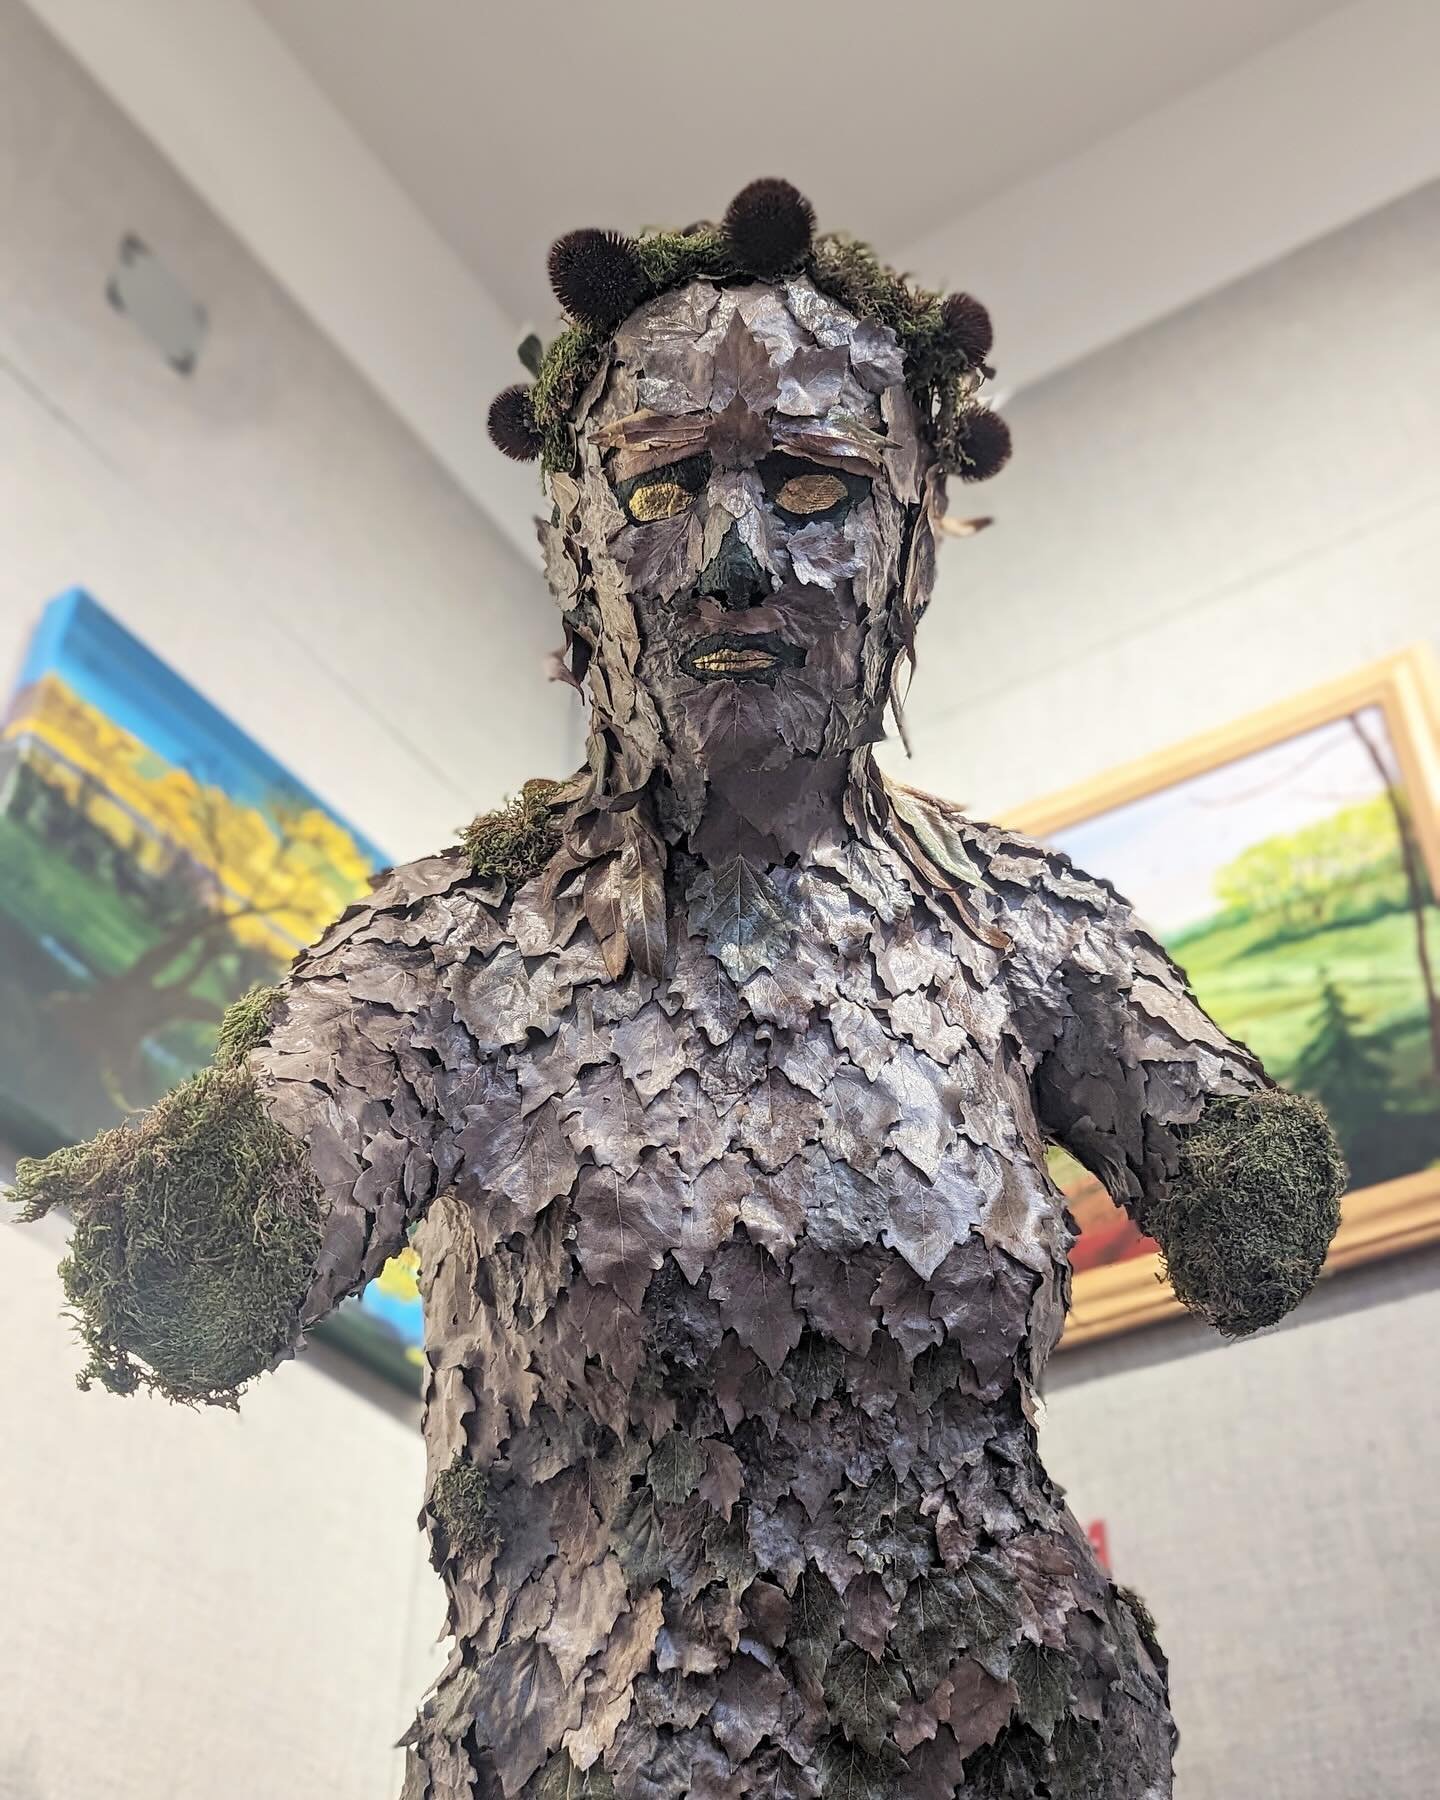 We&rsquo;re sharing a few BEFORE / AFTER and artist statements from the FORM REDUX exhibit on at the Spruce Grove Art Gallery until May 11. 

First up: 

Sylvan Serenity by Kristina Miko, Mixed Media Sculpture, 42x30x30, $350

&ldquo;For the proposed